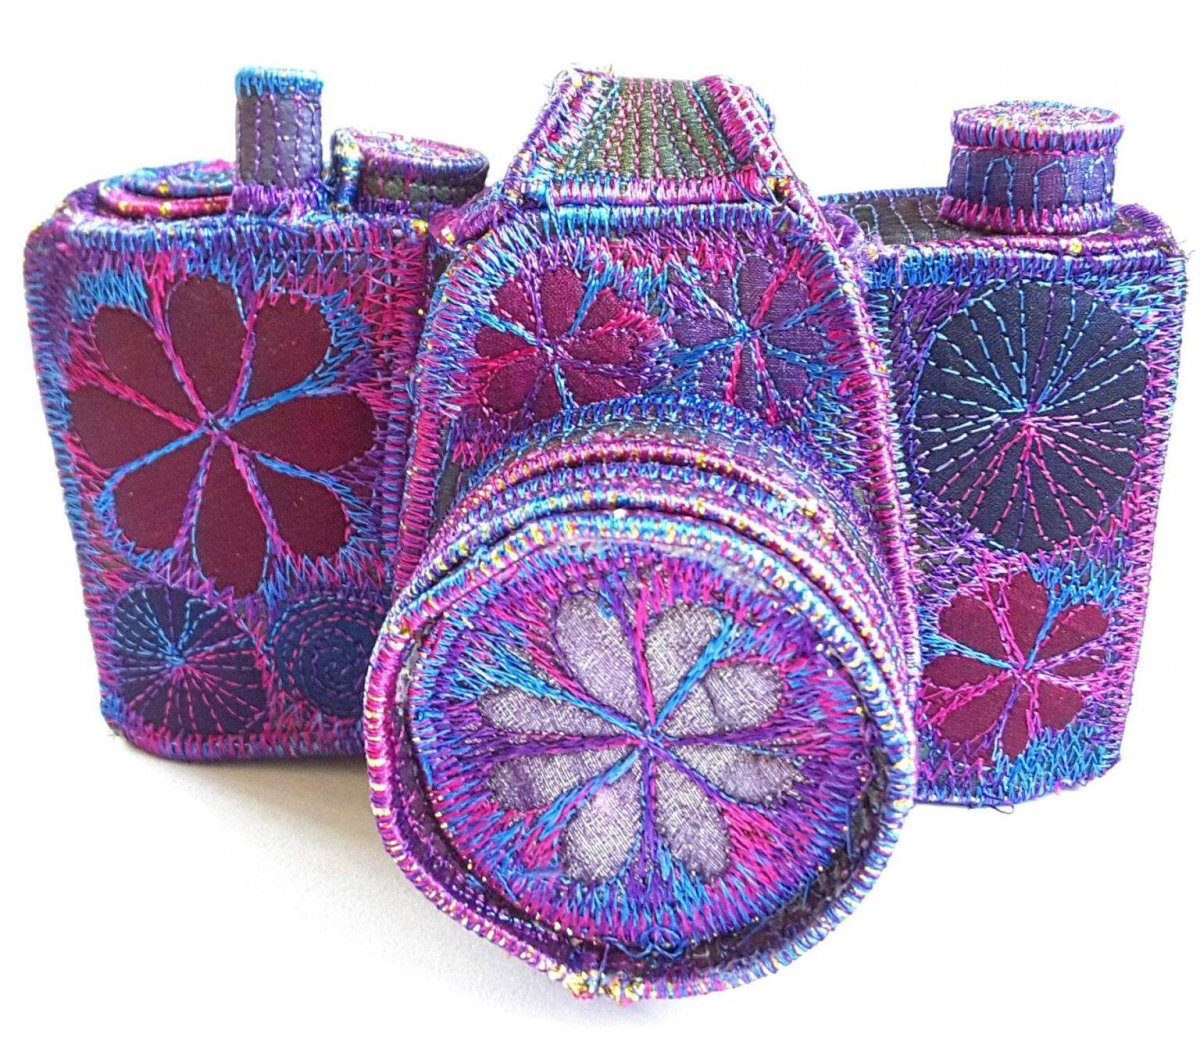 Gorgeously Patterned Textile Sculptures Of Household Objects By Sue Trevor 12